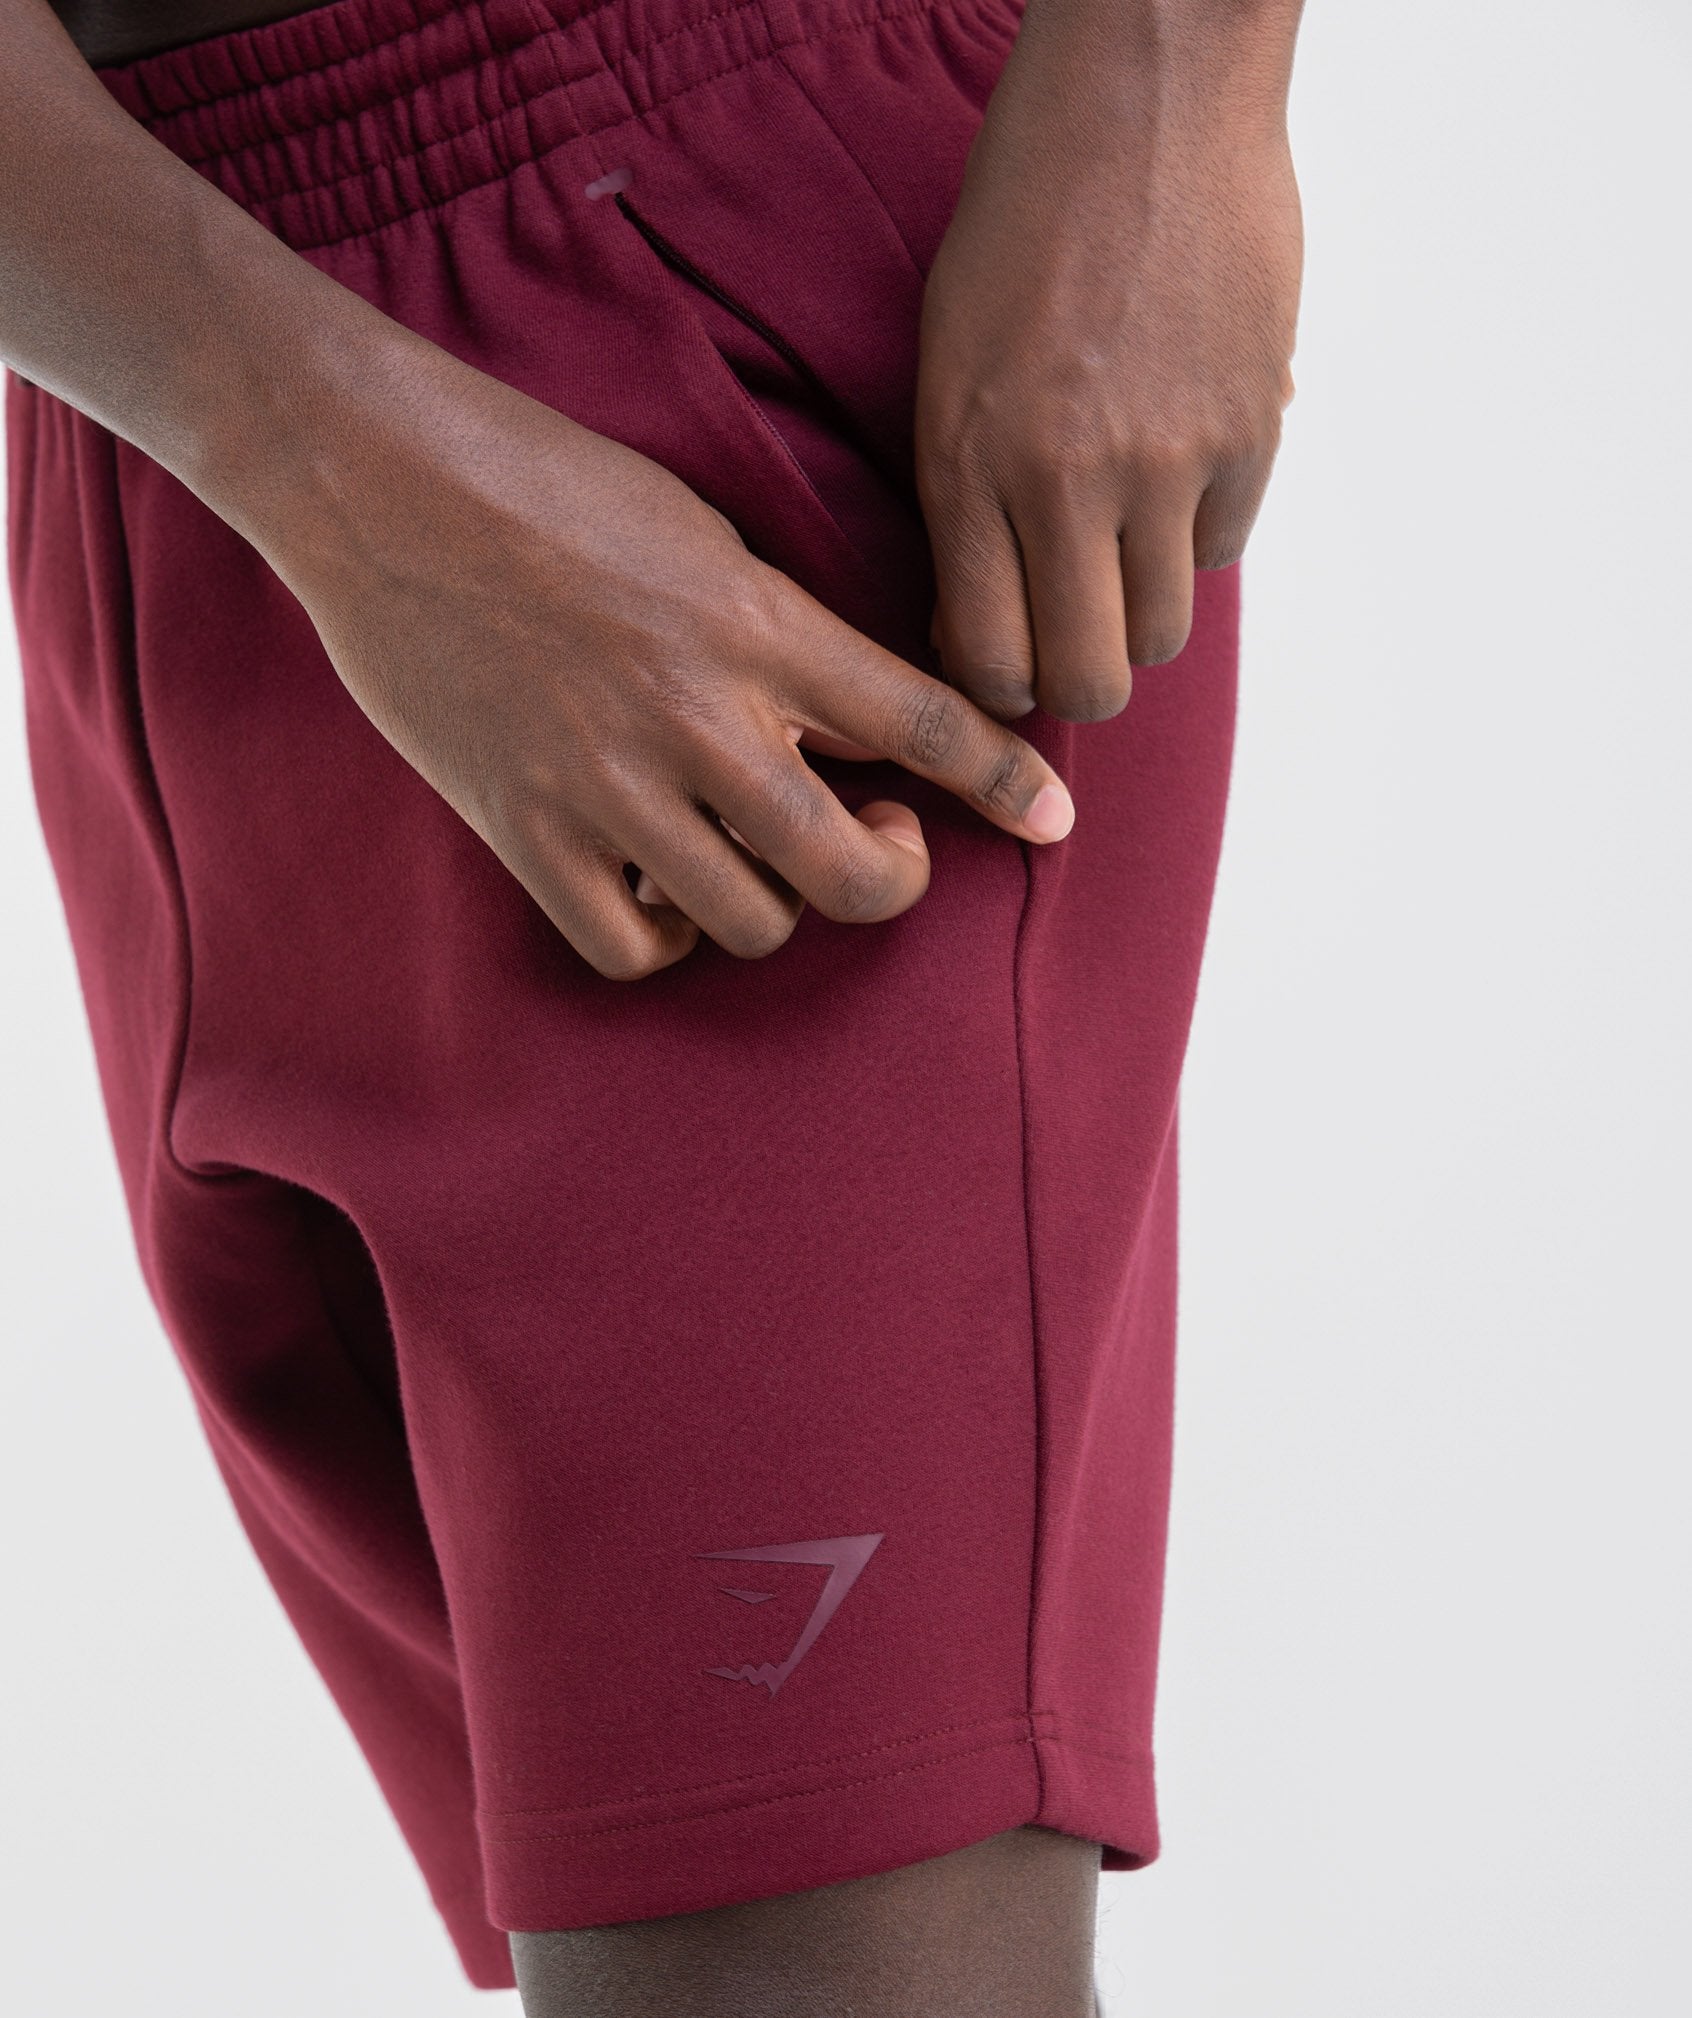 Ozone Shorts in Port - view 4